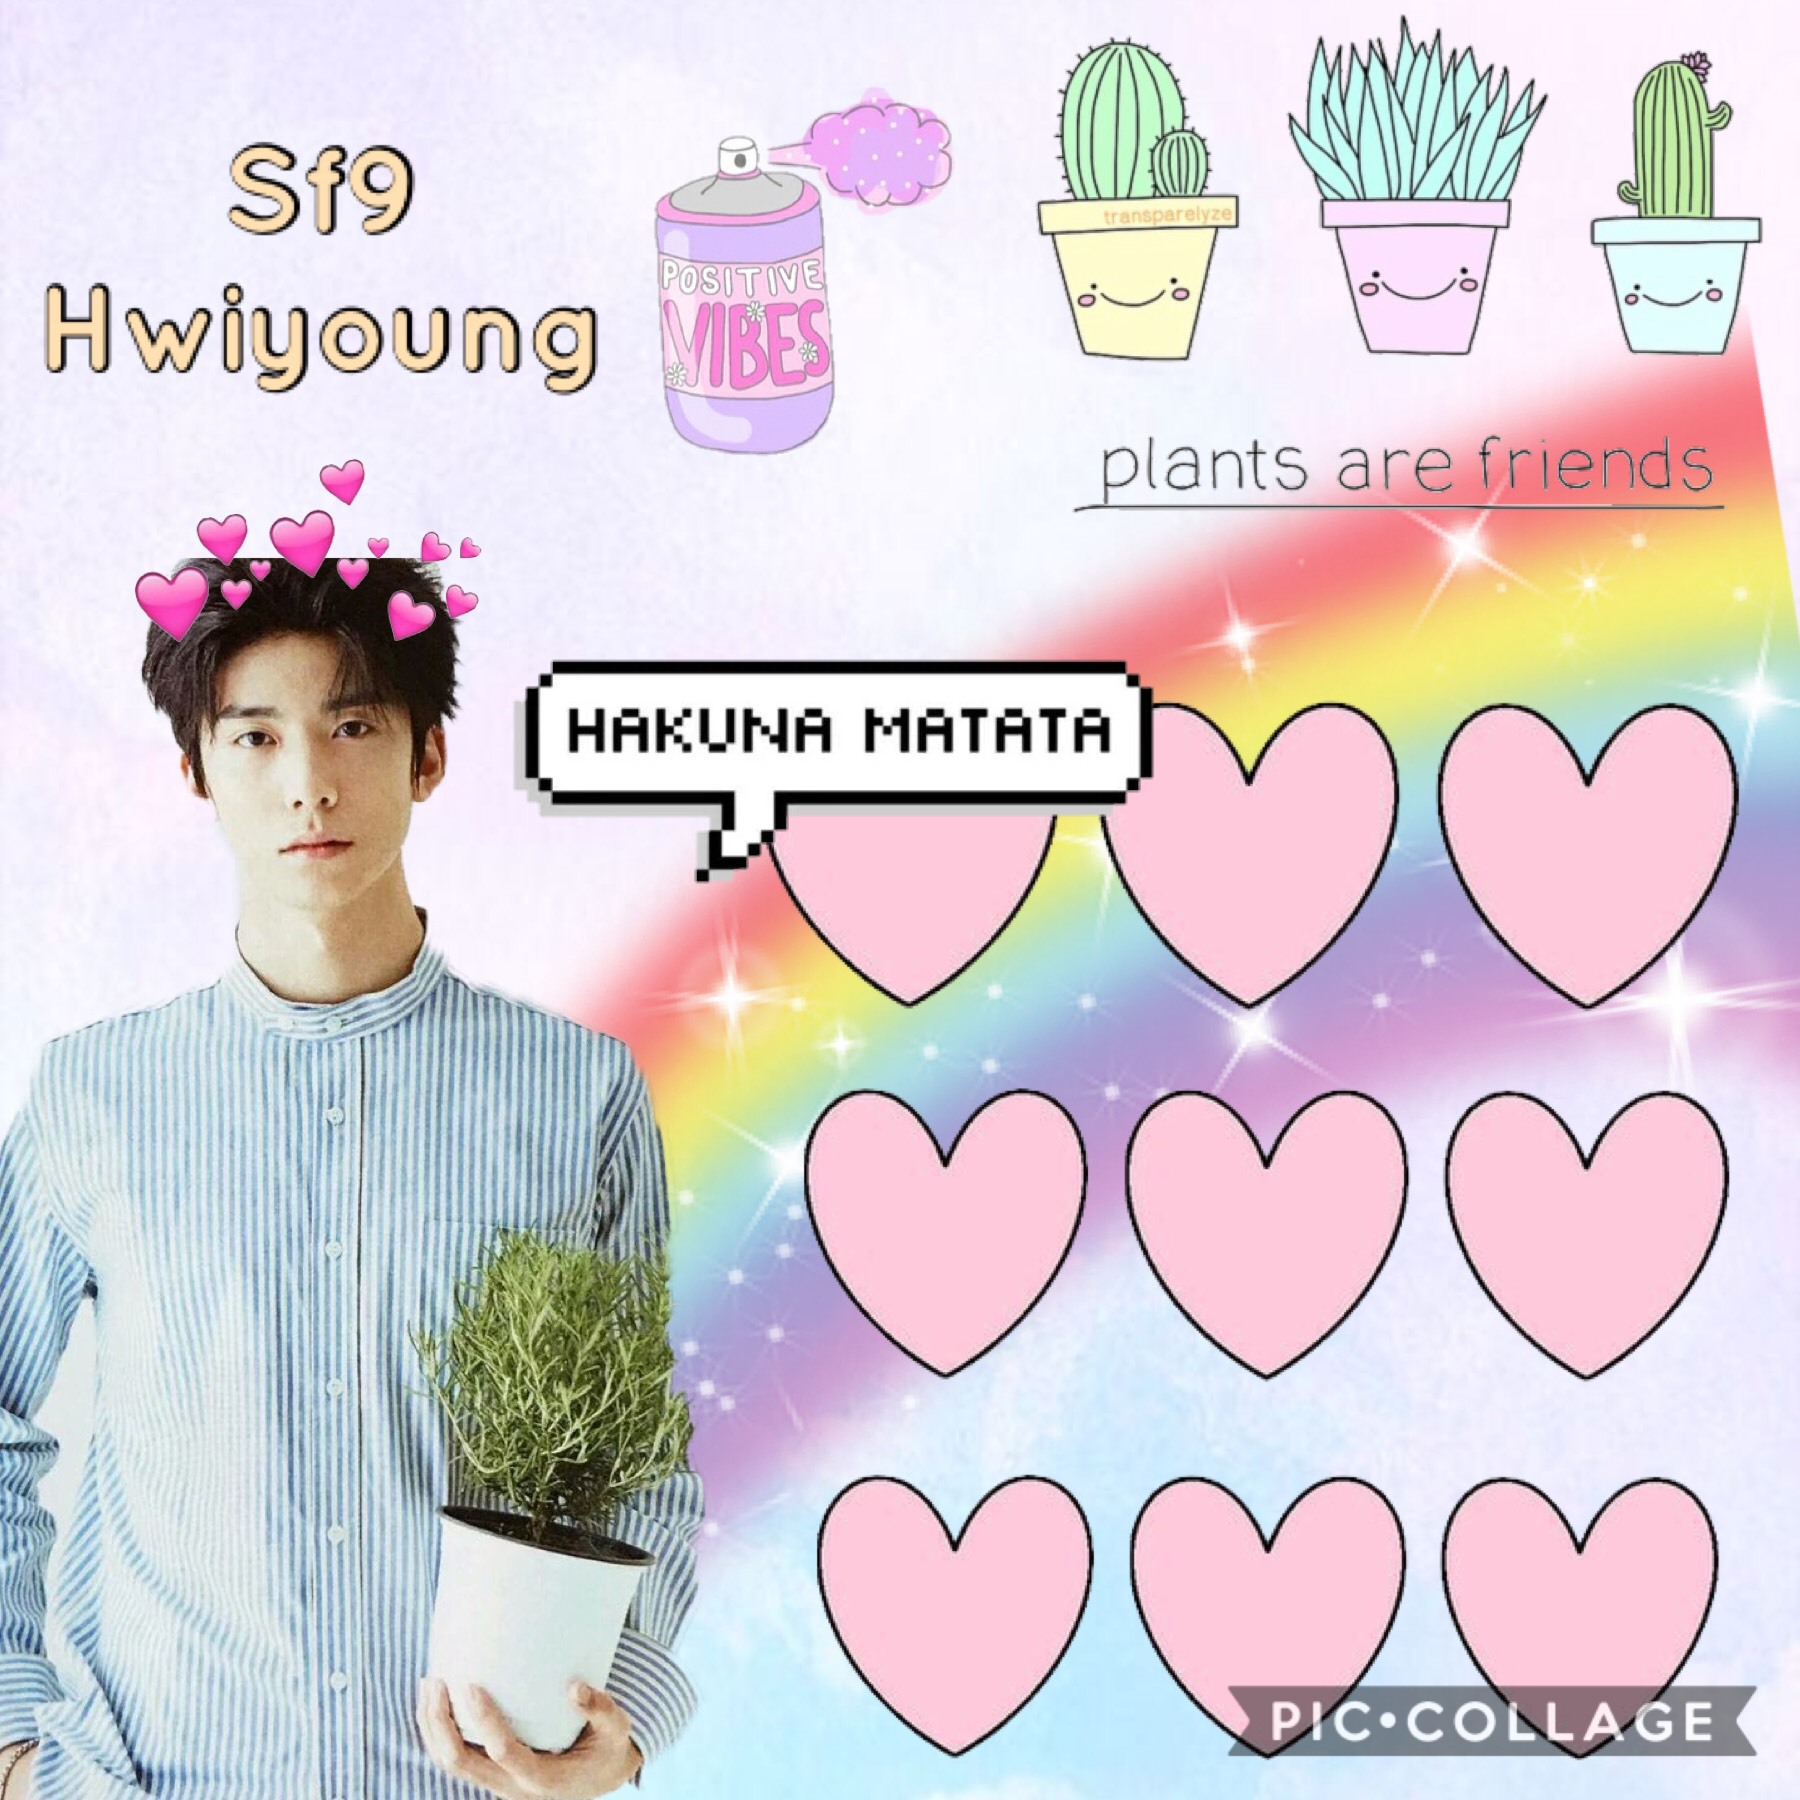 ~💘~
Hwiyoung looks so beautiful holding a plant😂😂